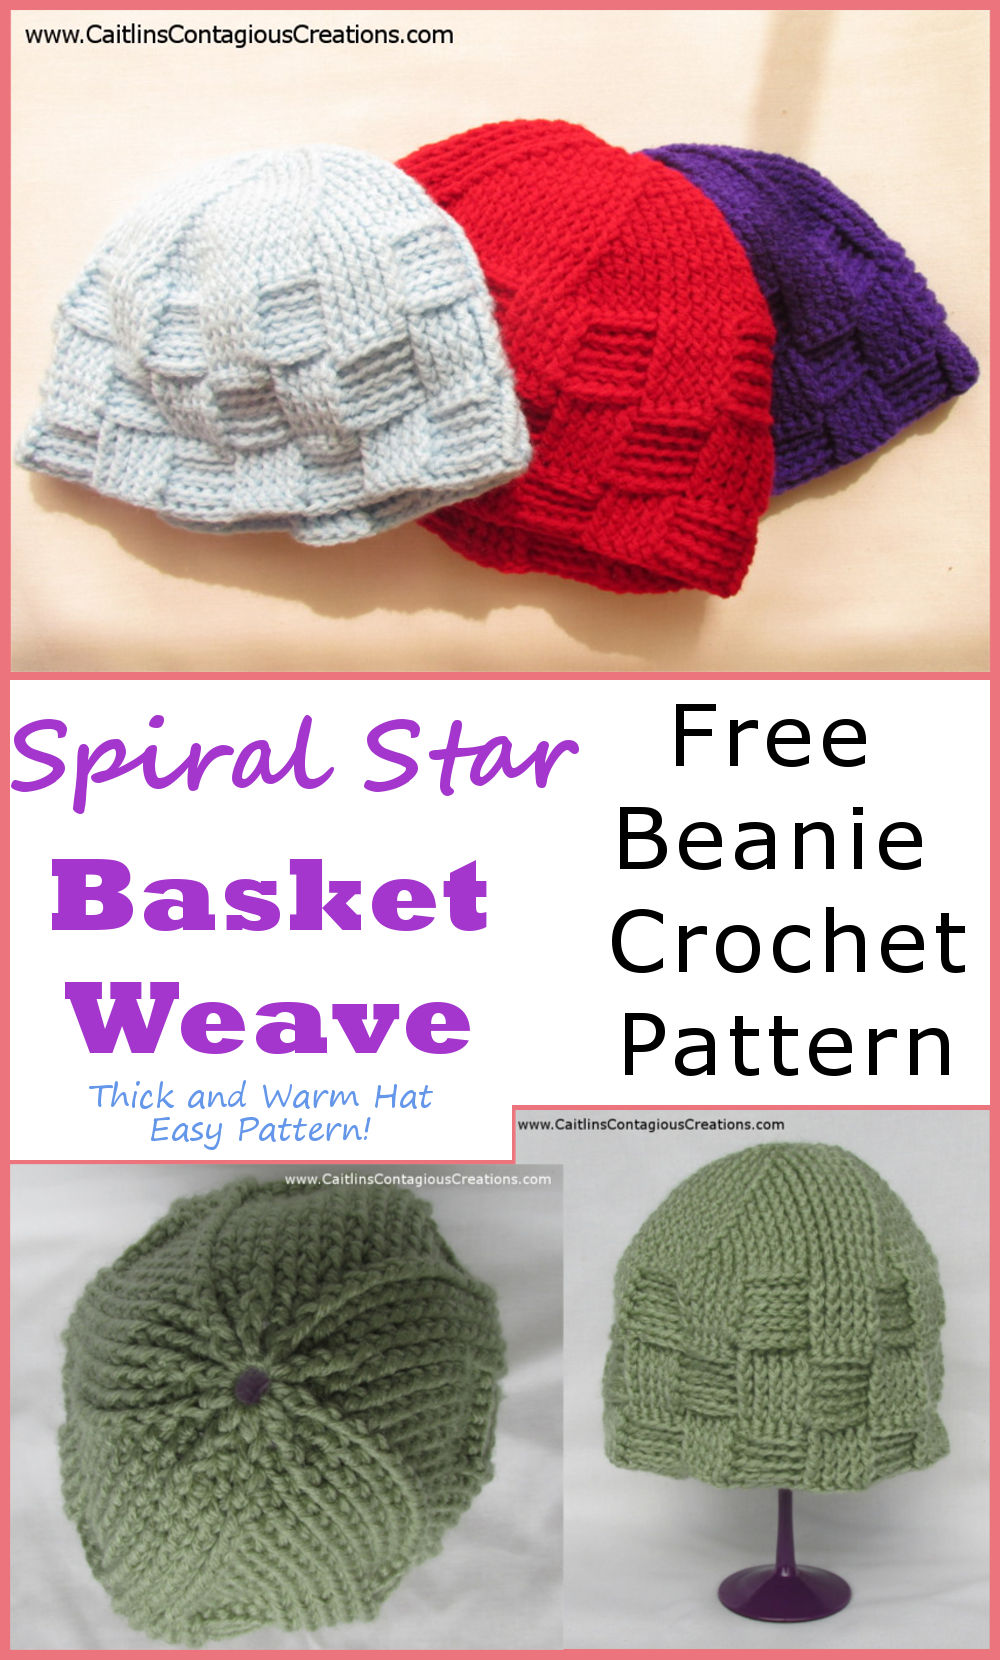 Basket Weave Beanie crochet pattern with a spiral star pattern on top from Caitlin's Contagious Creations. This quick and easy winter hat features a fun spiral star design on top and basket weave texture on the sides. This adult sized cap makes a great gift for men and women. 